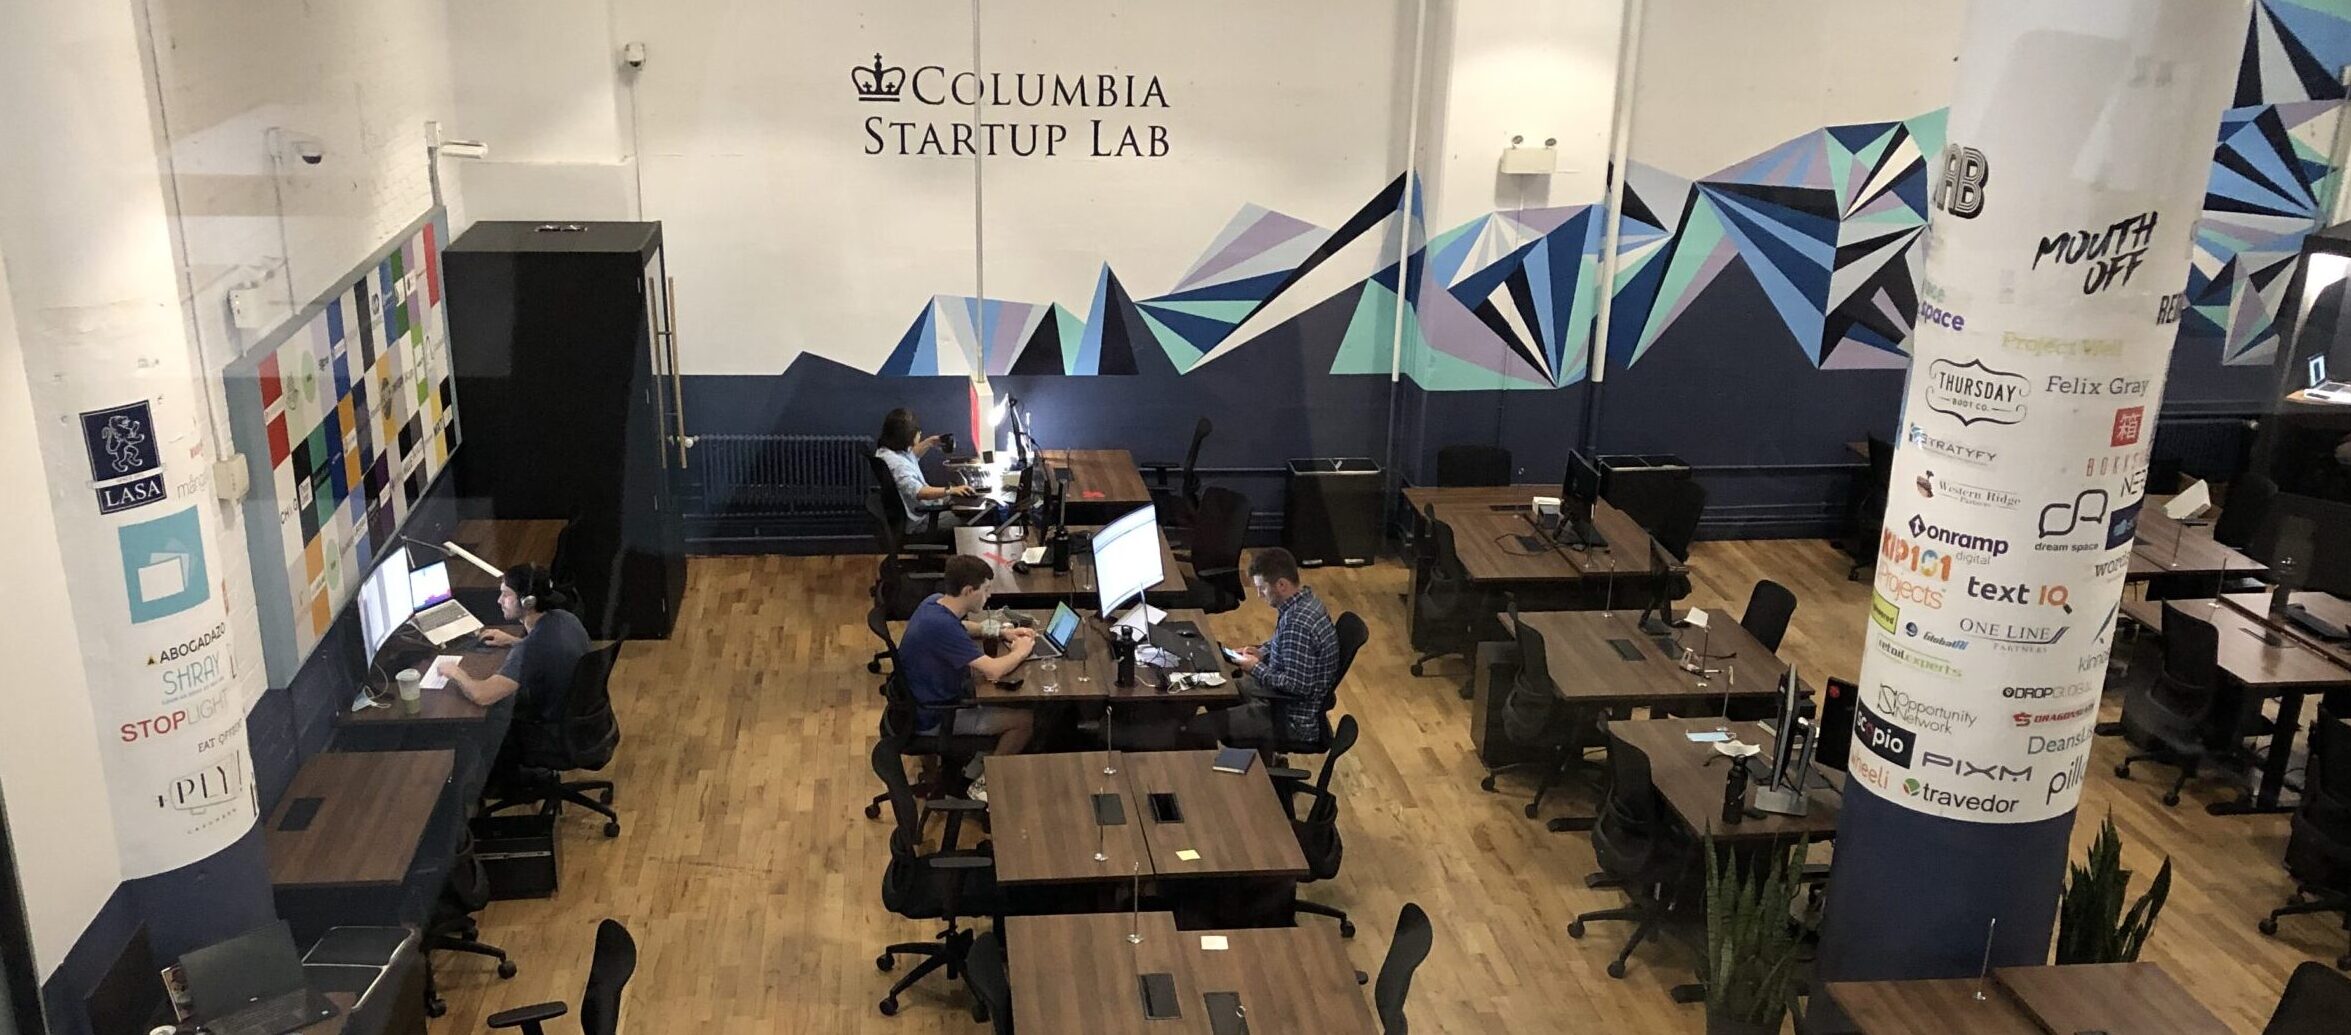 Aerial view of the Columbia Startup Lab in Soho